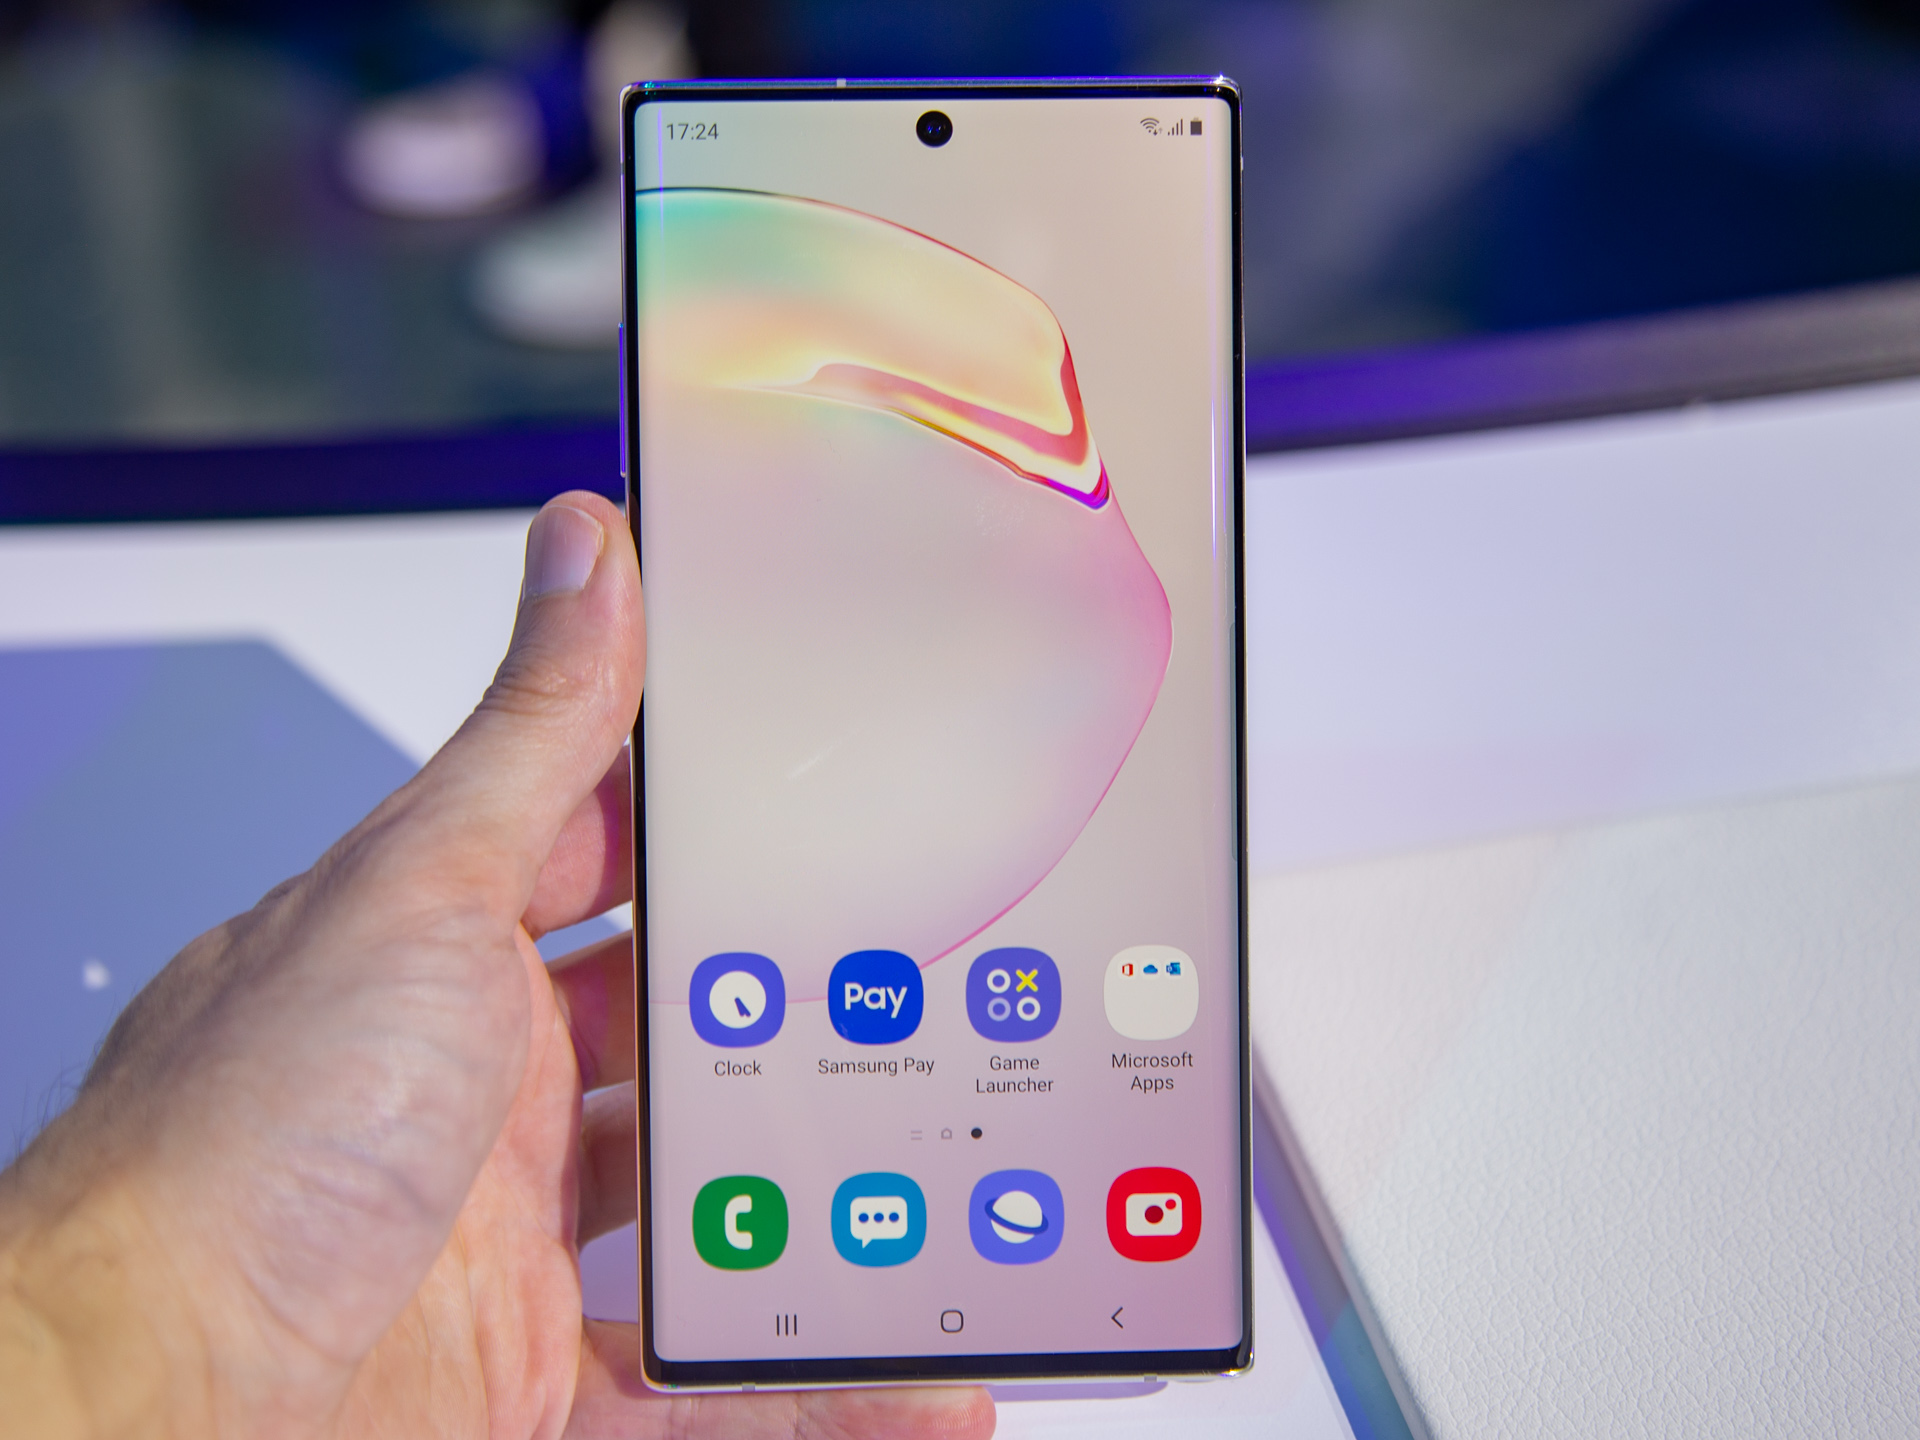 Cheaper Note to be called Samsung Galaxy Note10 Lite -  news